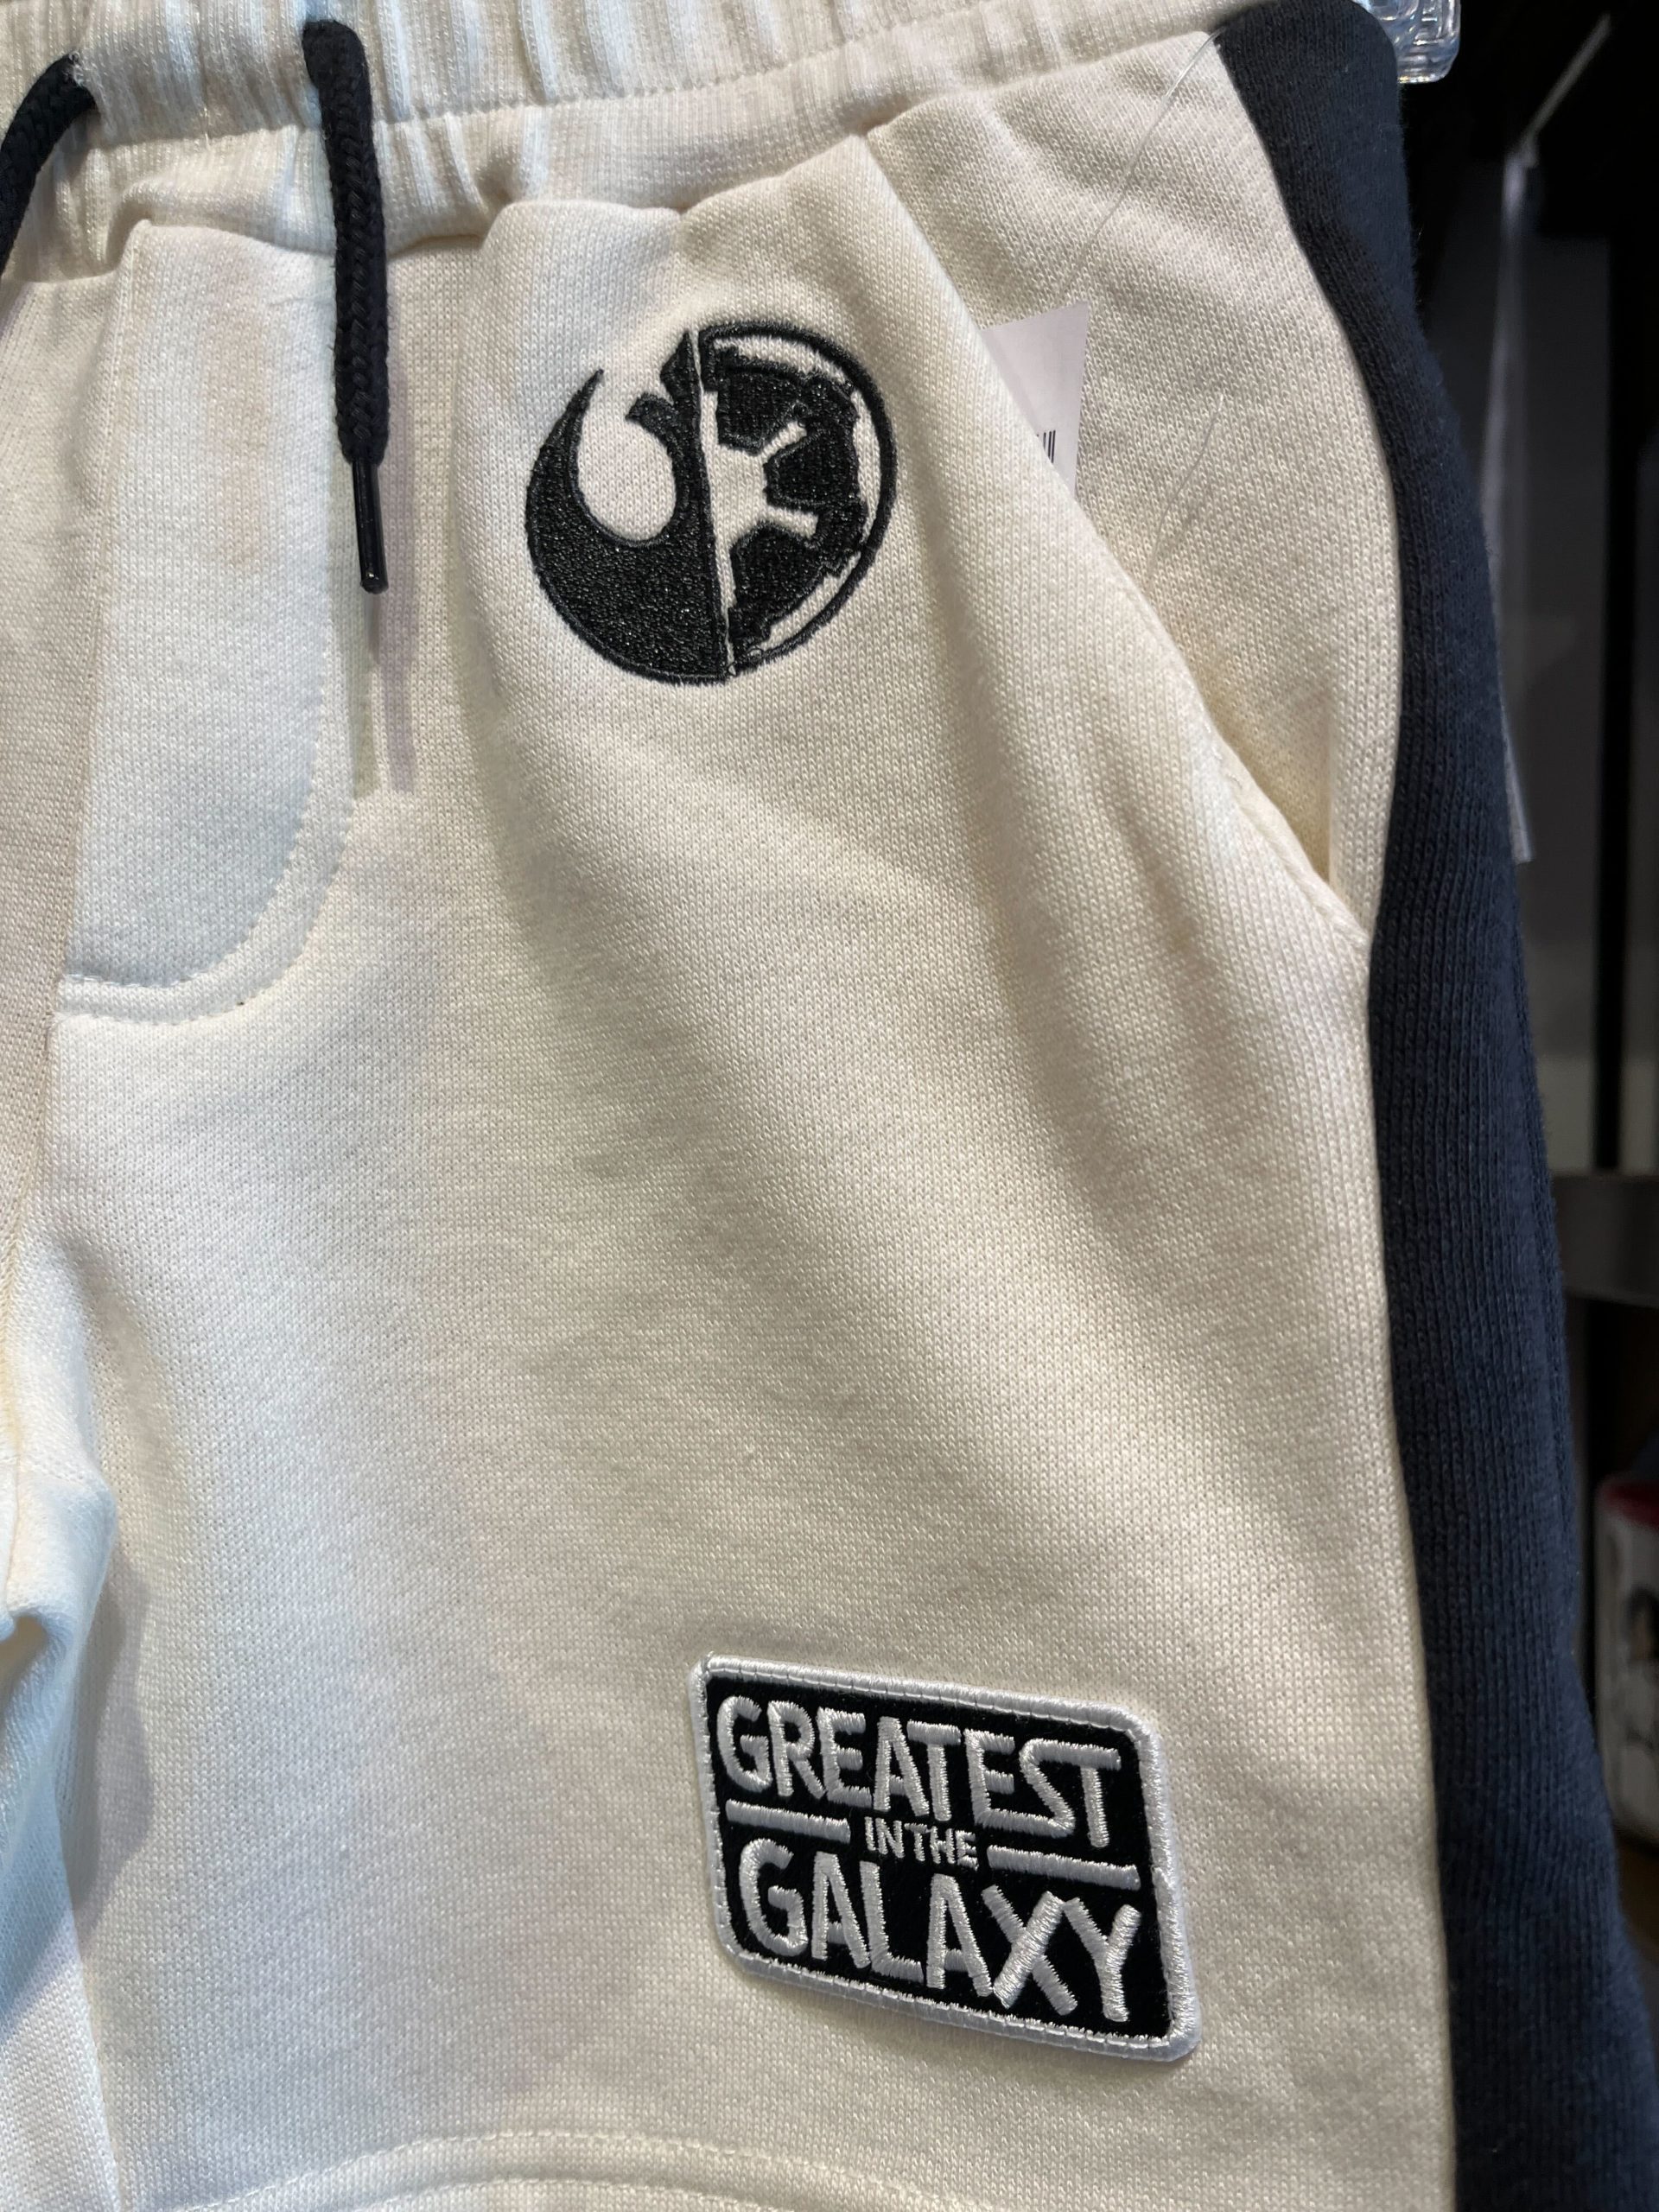 Star Wars Childrens Clothes Trading Post